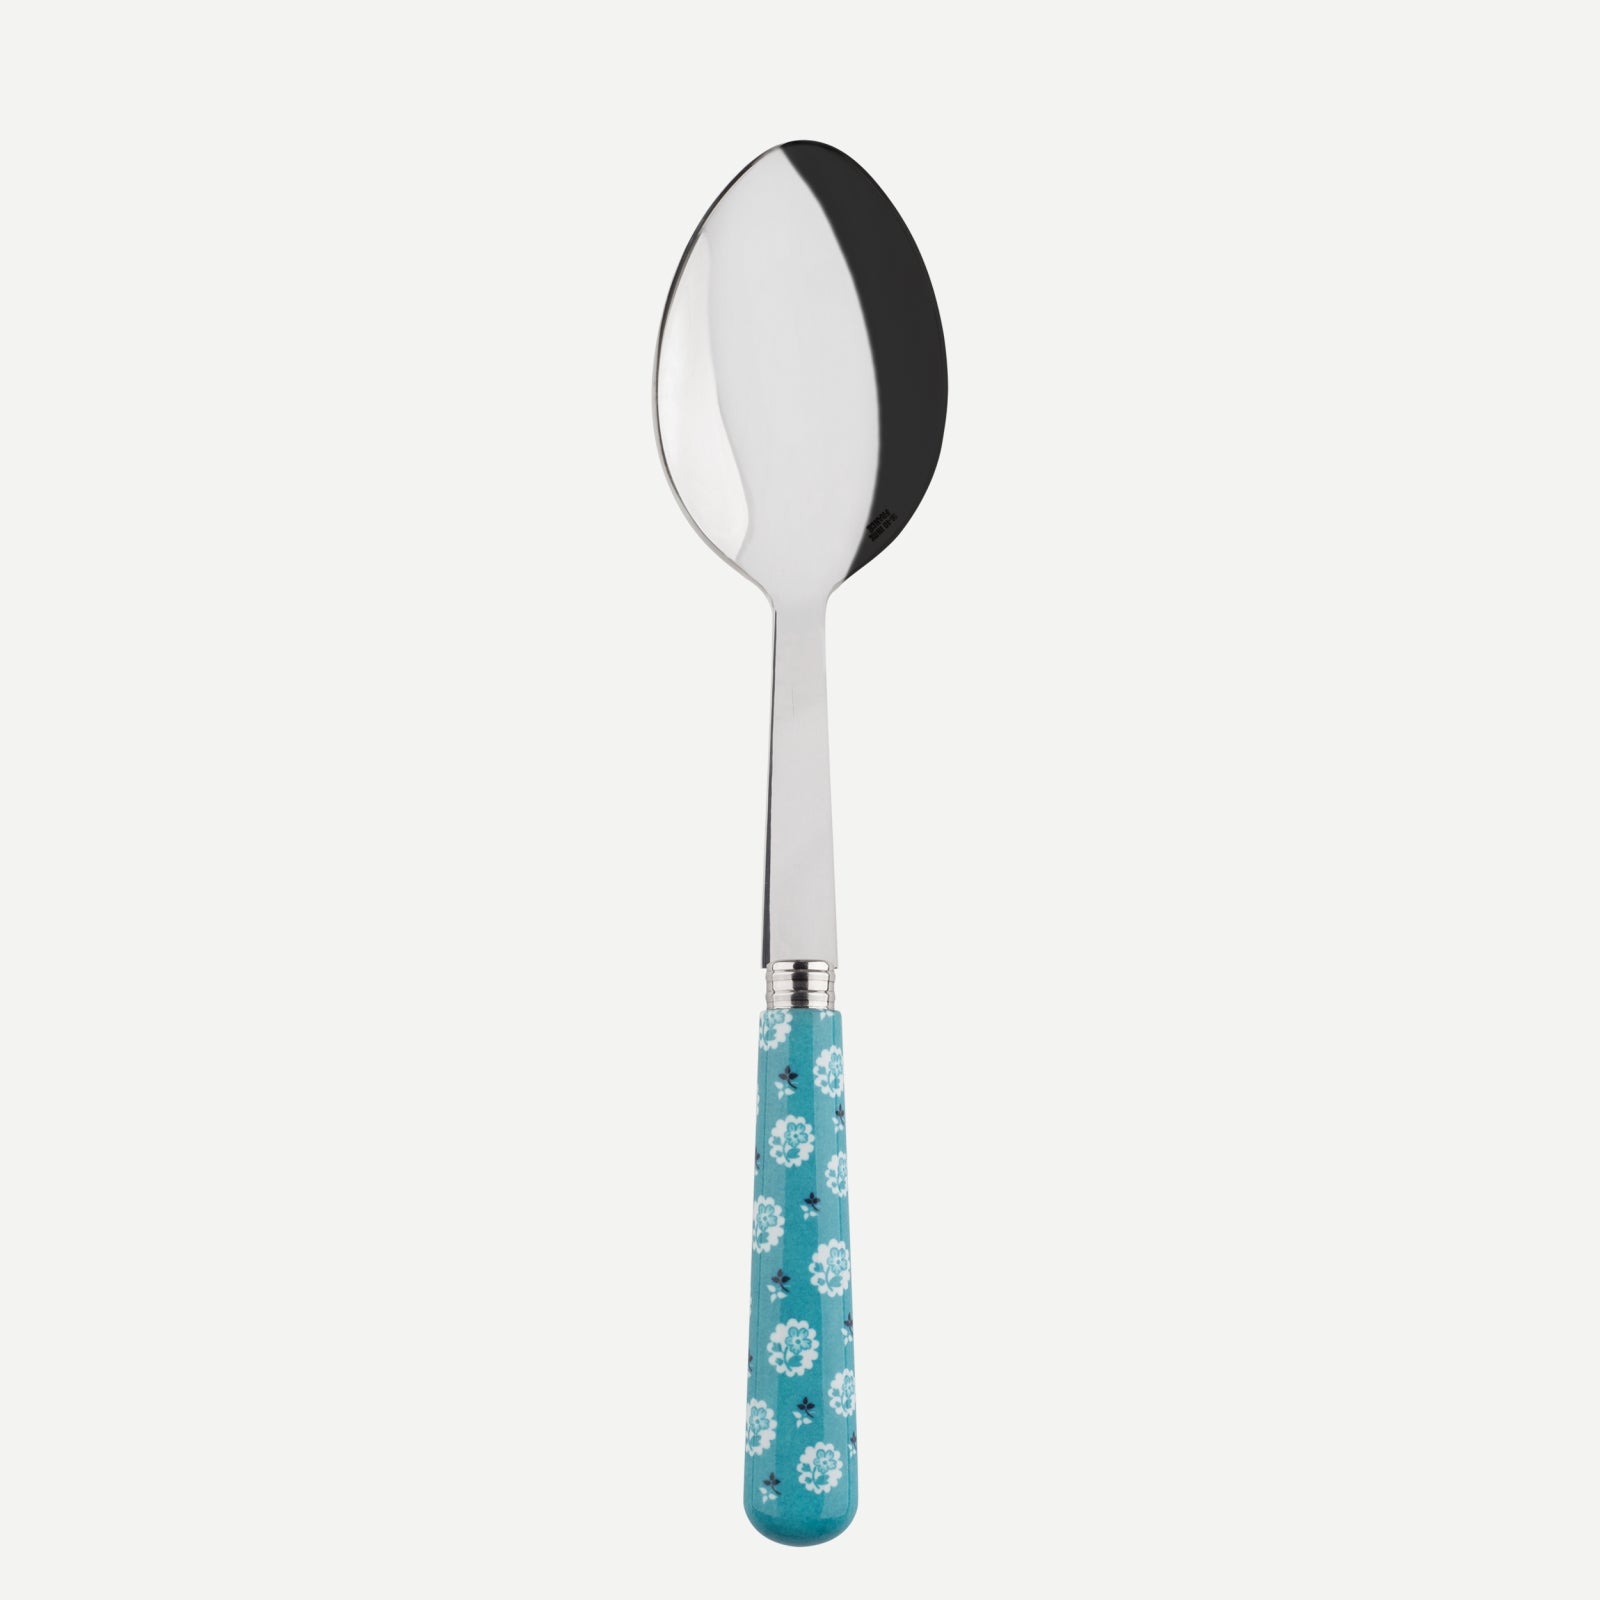 Serving spoon - Provencal - Turquoise